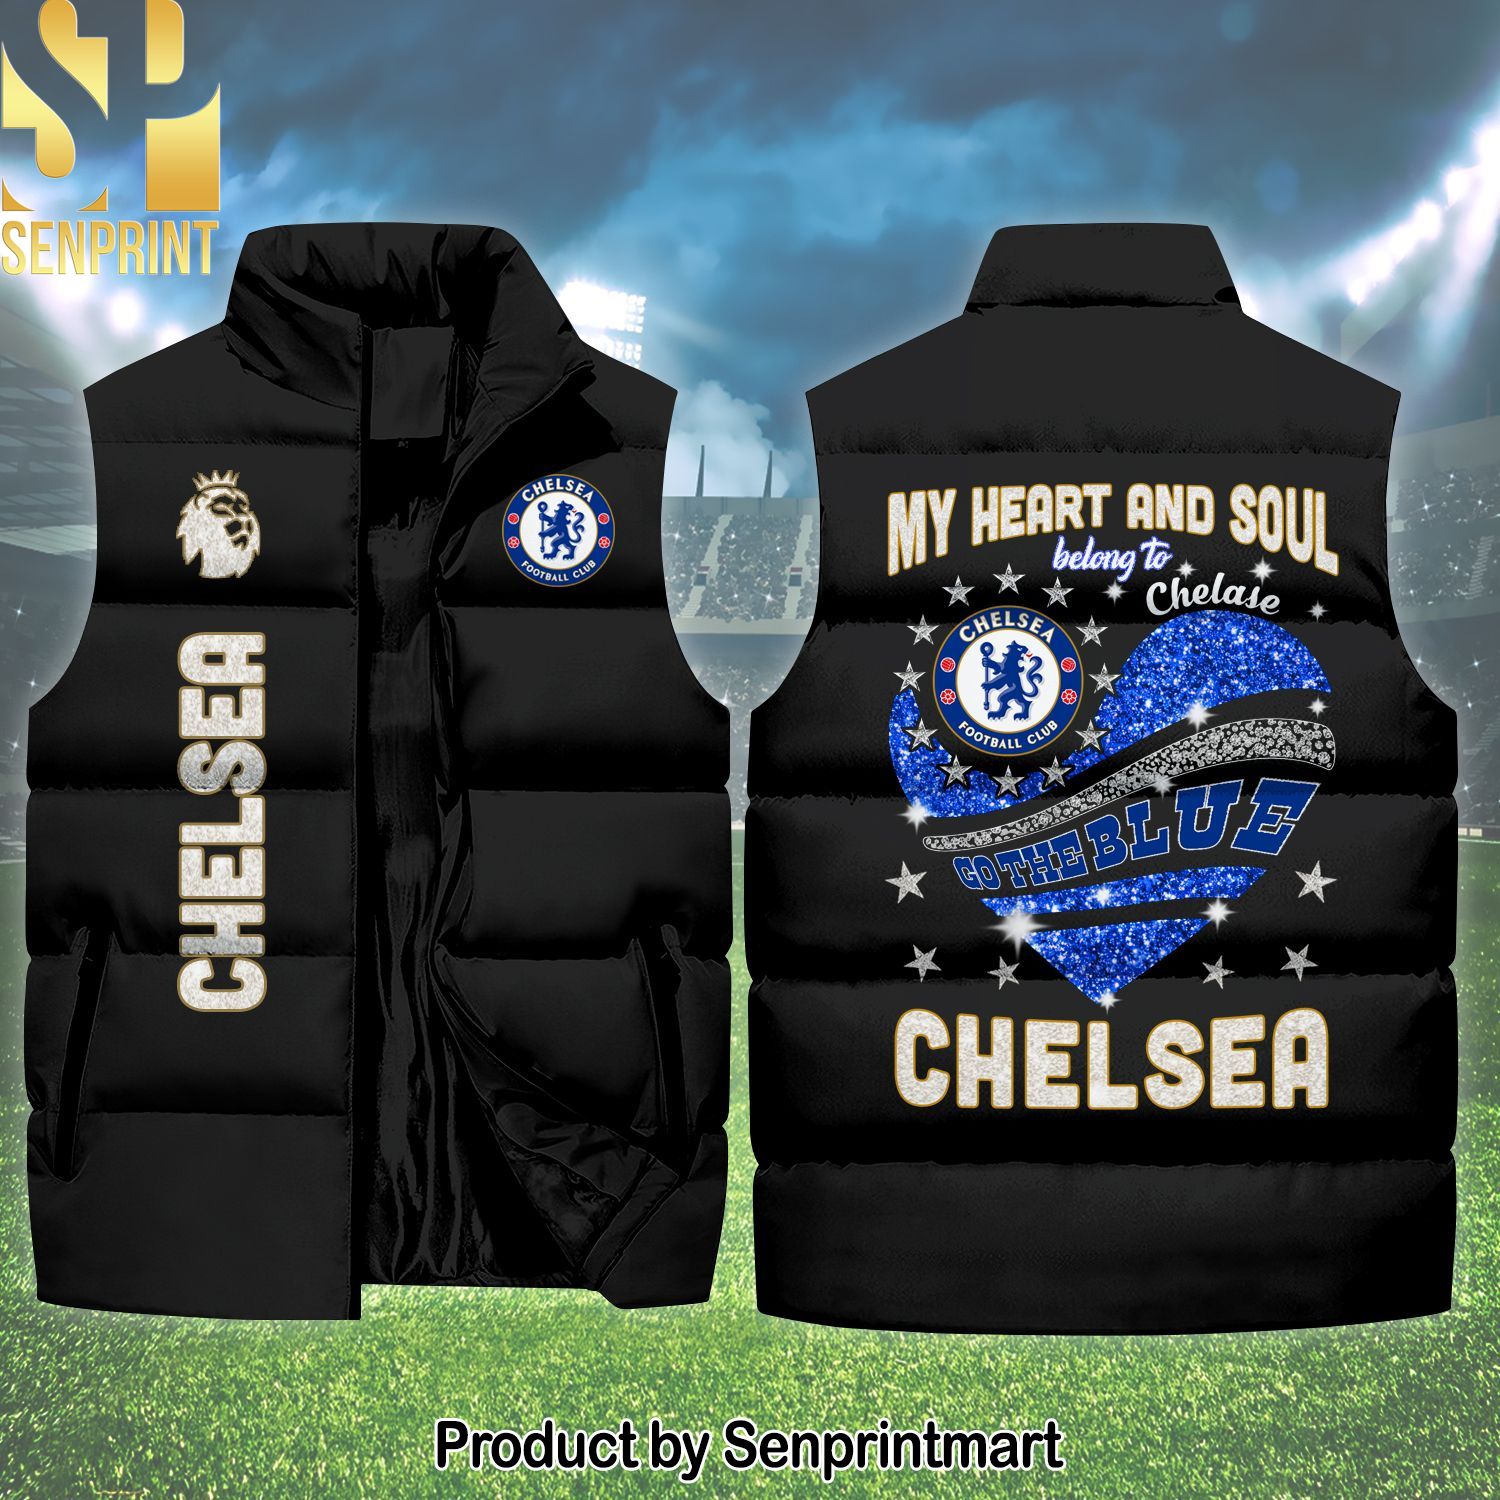 My Heart Belong To Chelsea New Outfit Sleeveless Jacket